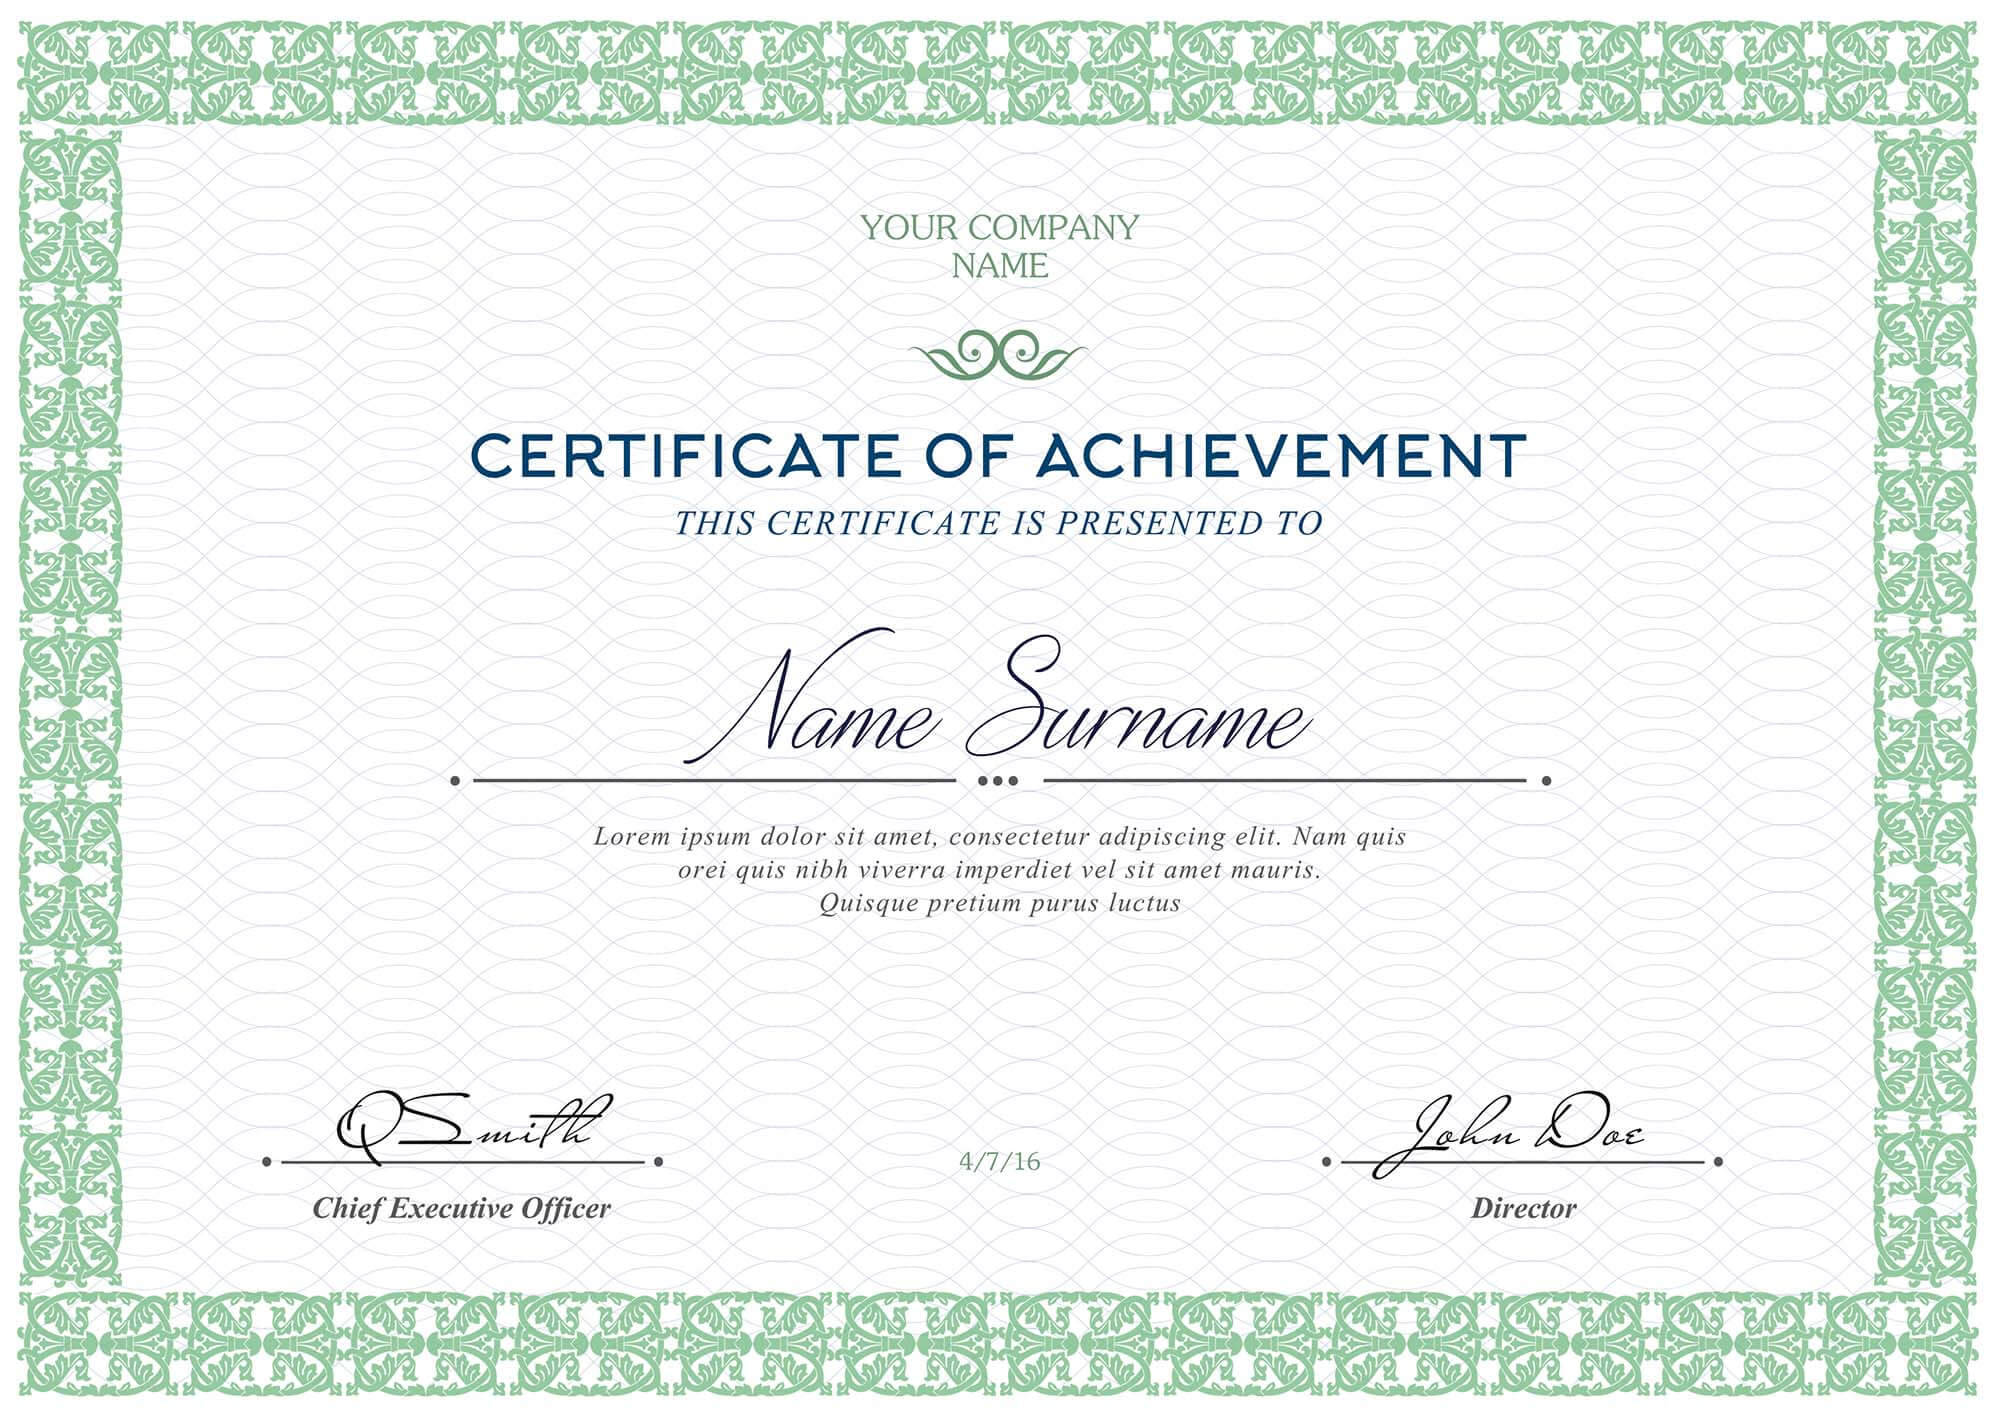 Free Certificates Templates (Psd) In Update Certificates That Use Certificate Templates